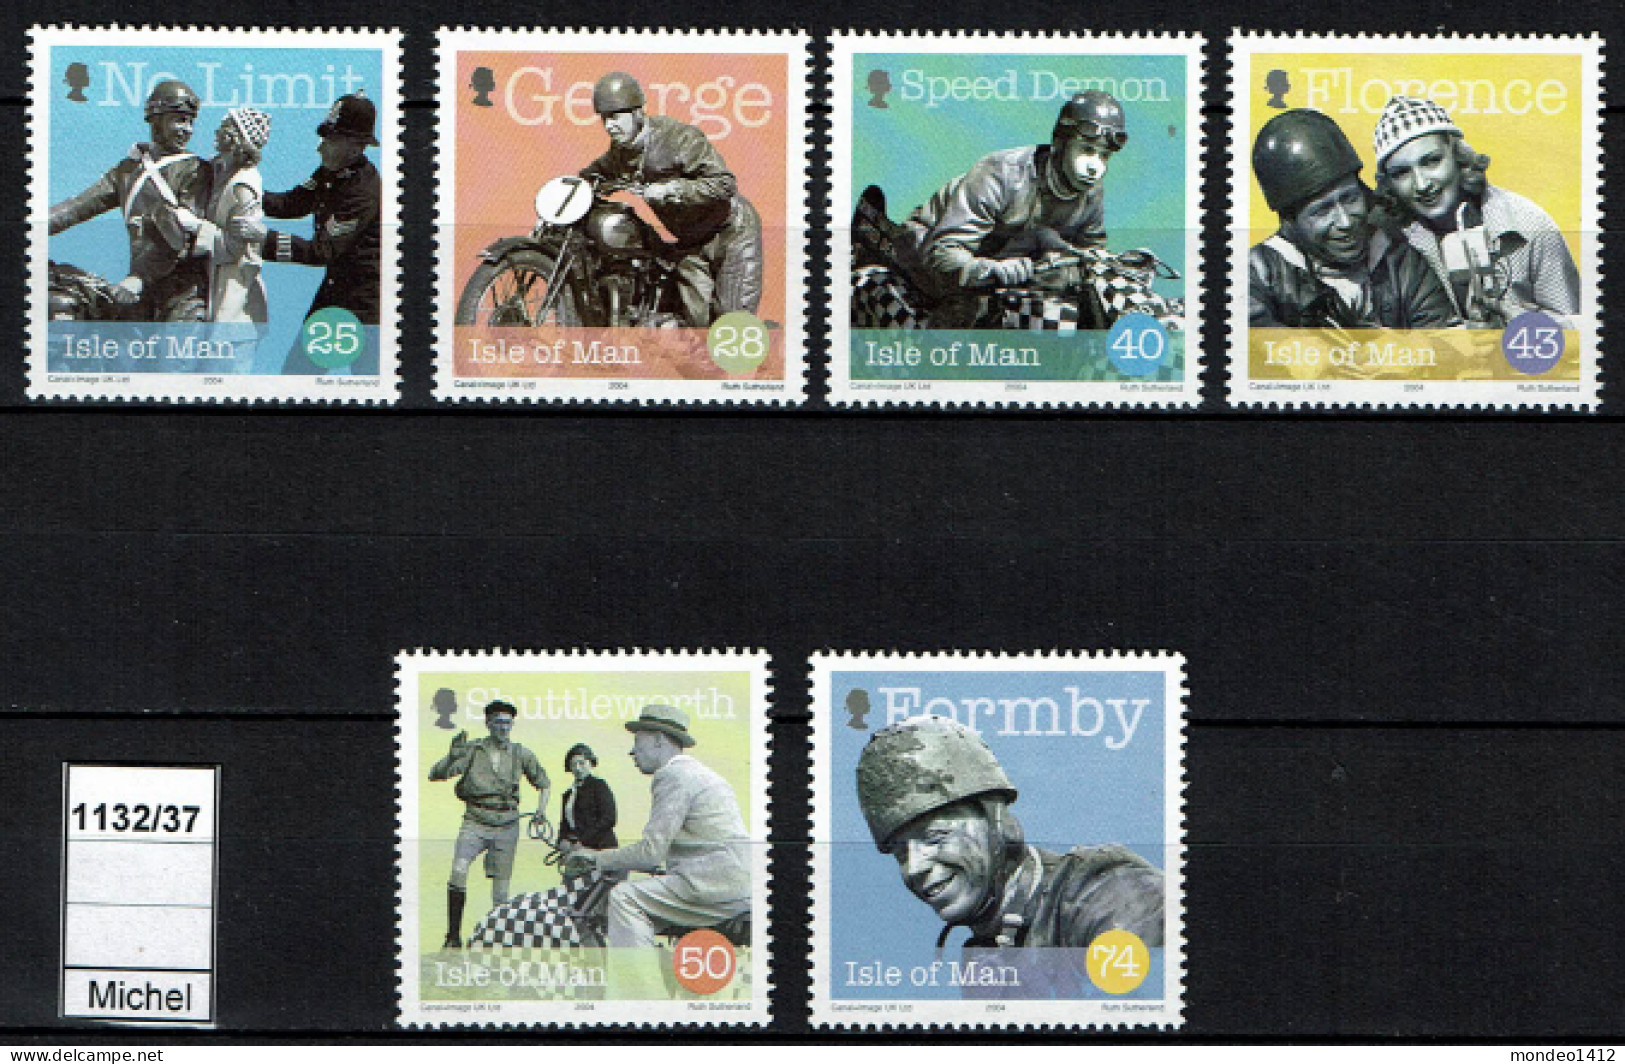 Isle Of Man - 2004 - MNH - Cinéma, Motorcycle, George Formby - English Actor, Singer-songwriter And Comedian - Man (Eiland)